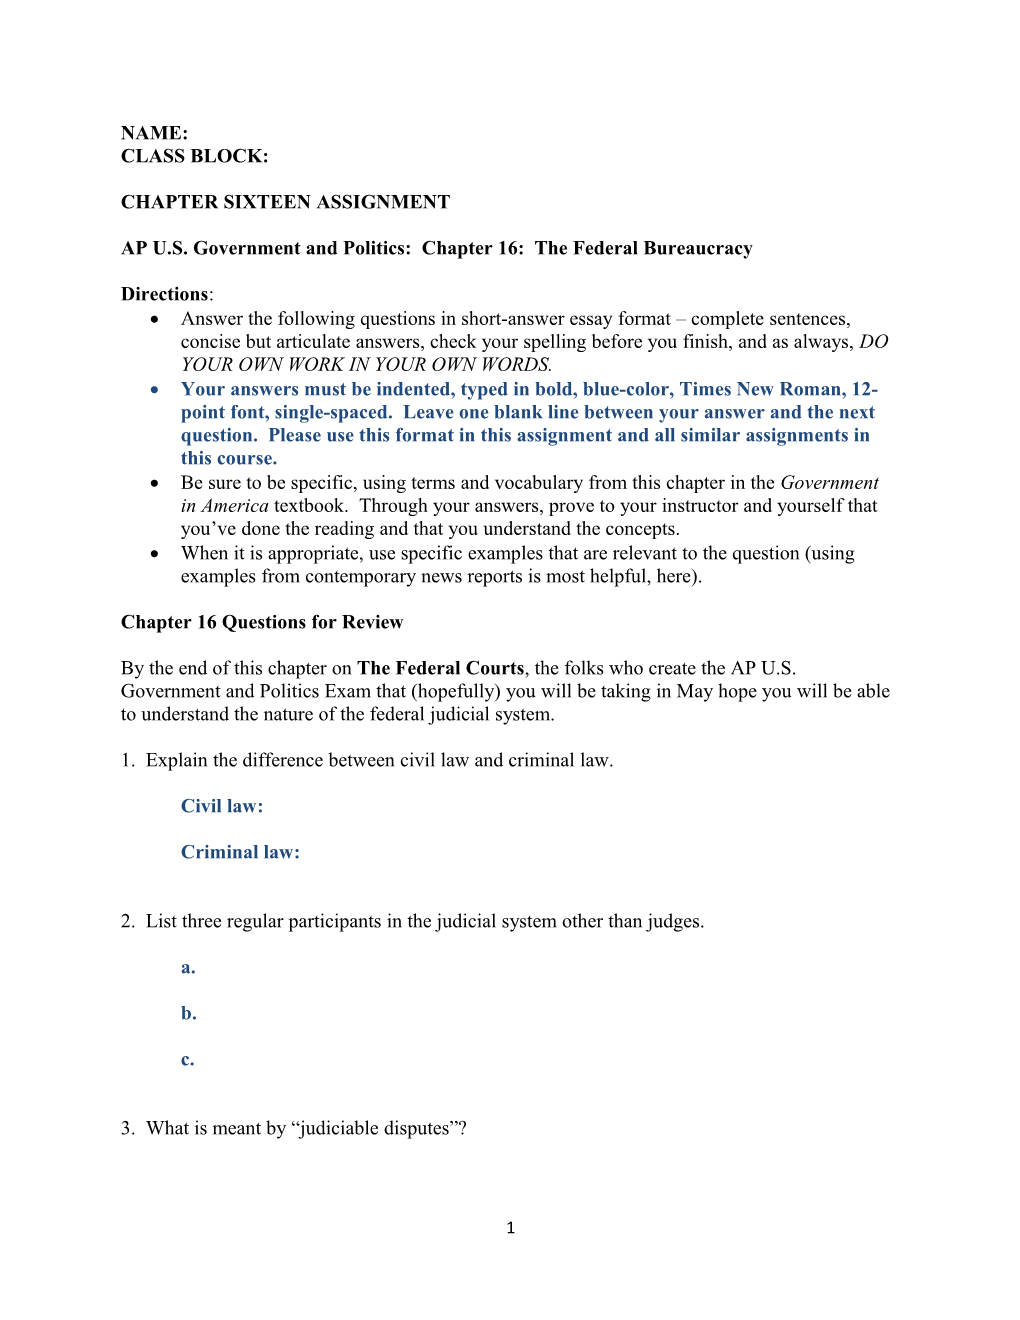 AP U.S. Government and Politics: Chapter 16: the Federal Bureaucracy